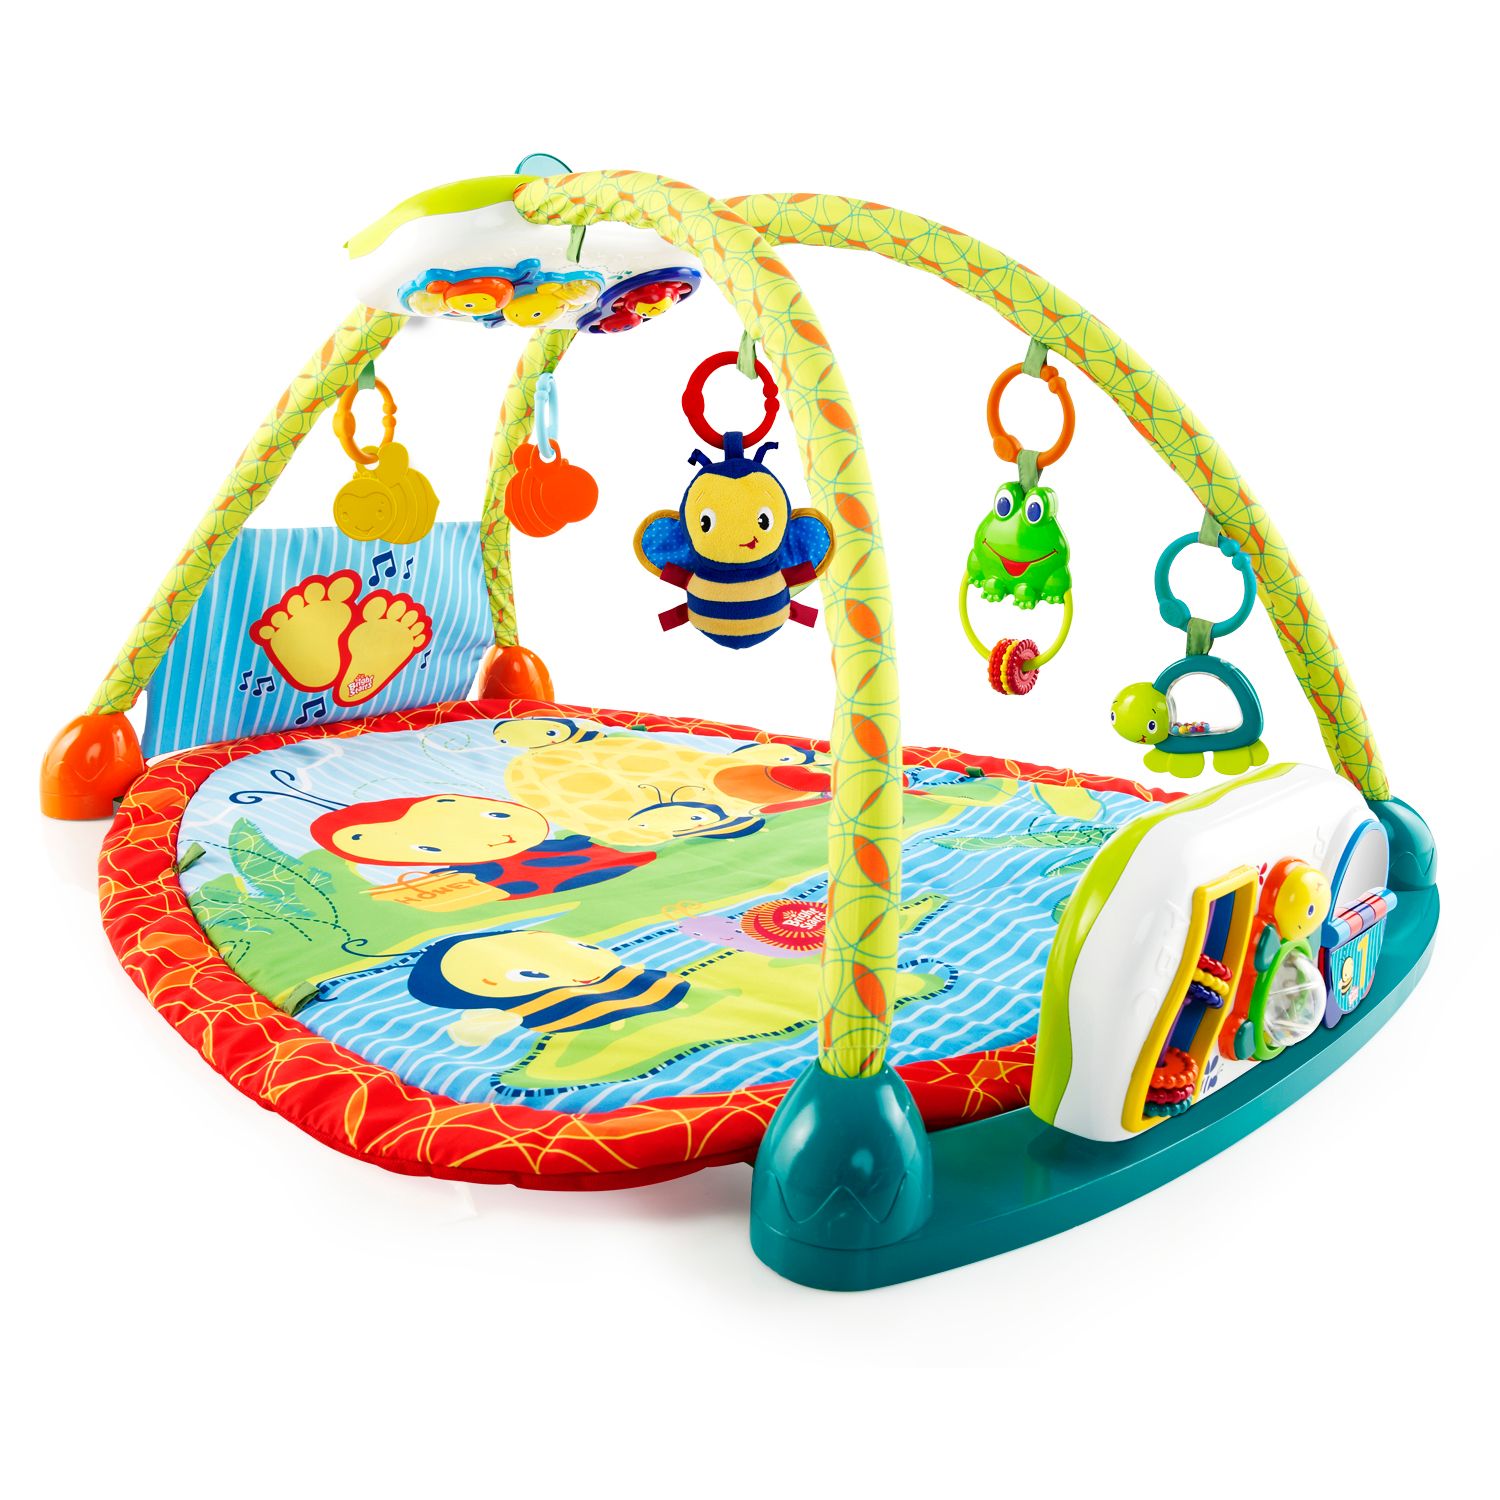 bright starts play table